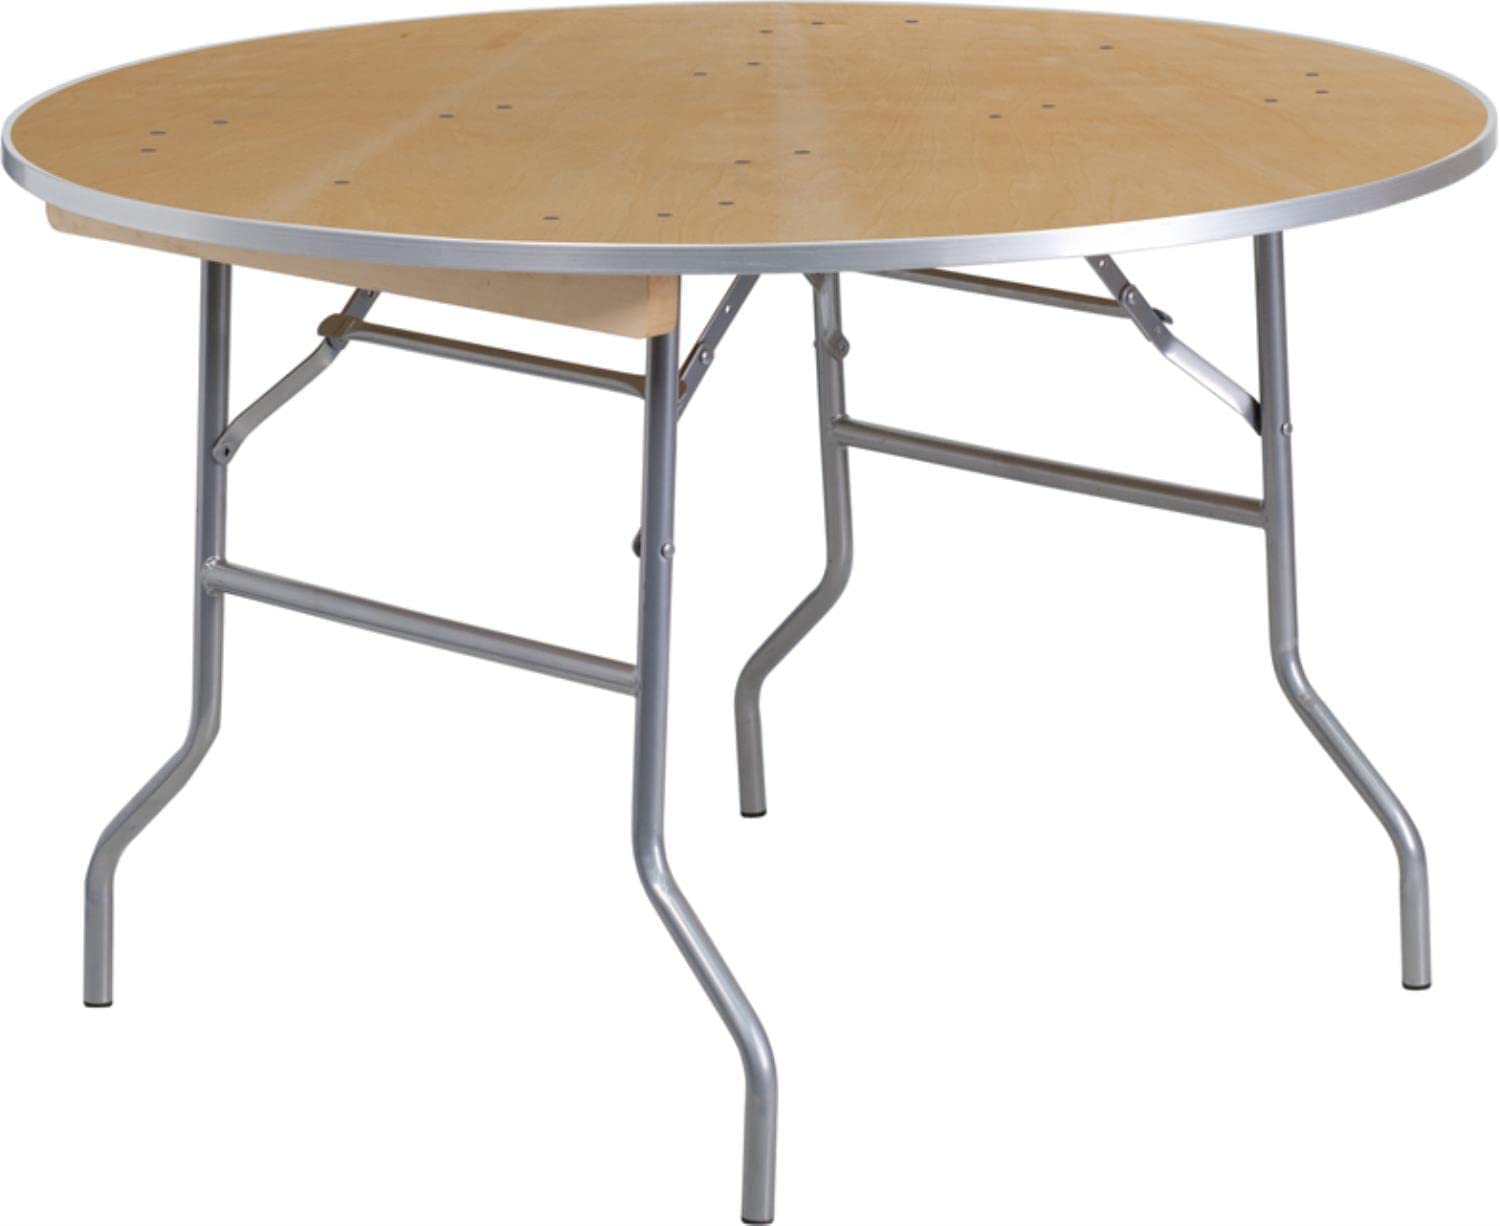 Flash Furniture 4-Foot Round HEAVY DUTY Birchwood Folding Banquet Table with METAL Edges